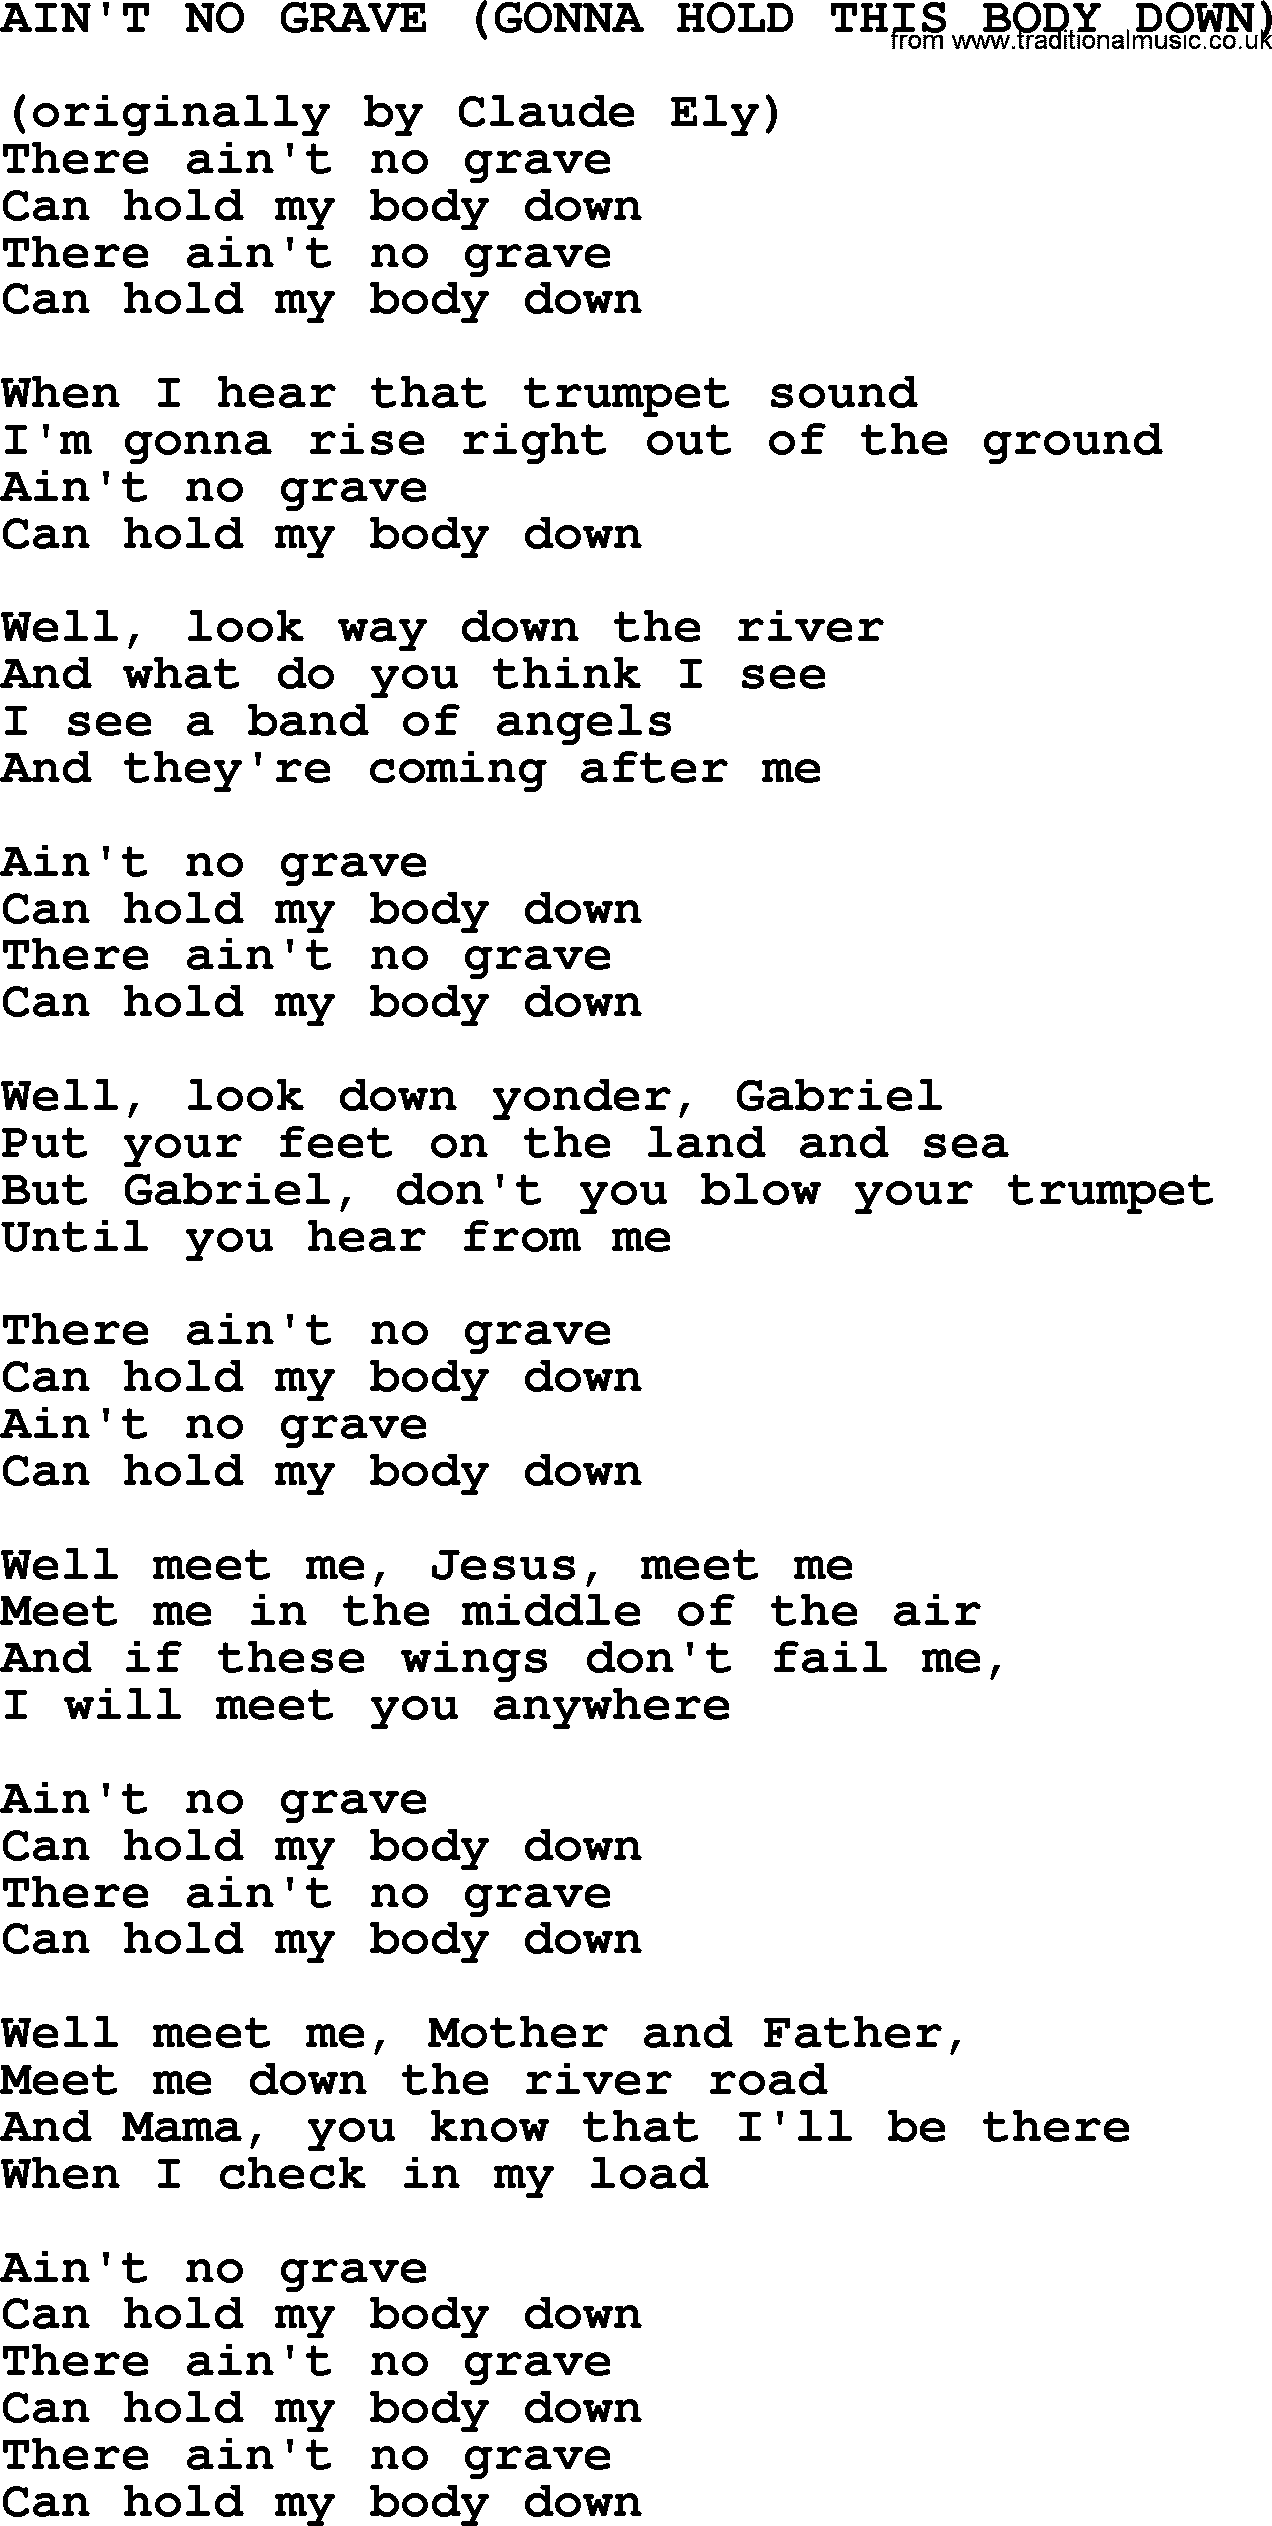 Johnny Cash song Ain't No Grave(Gonna Hold This Body Down).txt lyrics